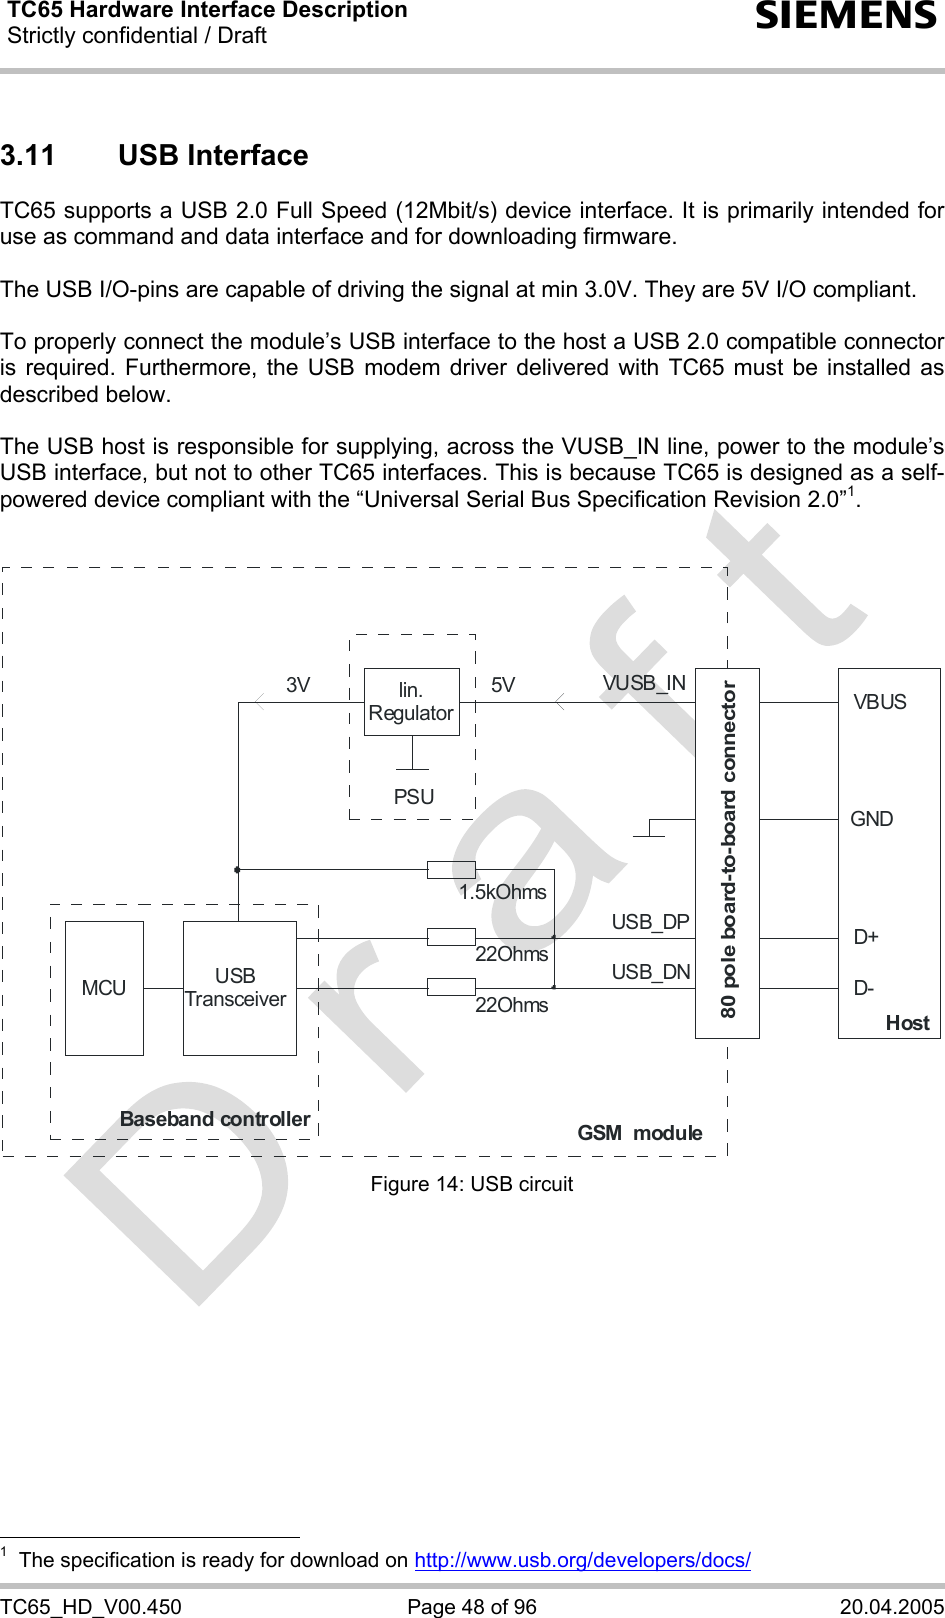 TC65 Hardware Interface Description Strictly confidential / Draft  s TC65_HD_V00.450  Page 48 of 96  20.04.2005 3.11 USB Interface TC65 supports a USB 2.0 Full Speed (12Mbit/s) device interface. It is primarily intended for use as command and data interface and for downloading firmware.  The USB I/O-pins are capable of driving the signal at min 3.0V. They are 5V I/O compliant.  To properly connect the module’s USB interface to the host a USB 2.0 compatible connector is required. Furthermore, the USB modem driver delivered with TC65 must be installed as described below.  The USB host is responsible for supplying, across the VUSB_IN line, power to the module’s USB interface, but not to other TC65 interfaces. This is because TC65 is designed as a self-powered device compliant with the “Universal Serial Bus Specification Revision 2.0”1.   MCUUSBTransceiverlin.RegulatorPSUBaseband controllerGSM  moduleHost22Ohms22Ohms1.5kOhmsUSB_DPUSB_DNVUSB_IN5V3VD+D-VBUSGND80 pole board-to-board connector Figure 14: USB circuit                                                    1  The specification is ready for download on http://www.usb.org/developers/docs/ 